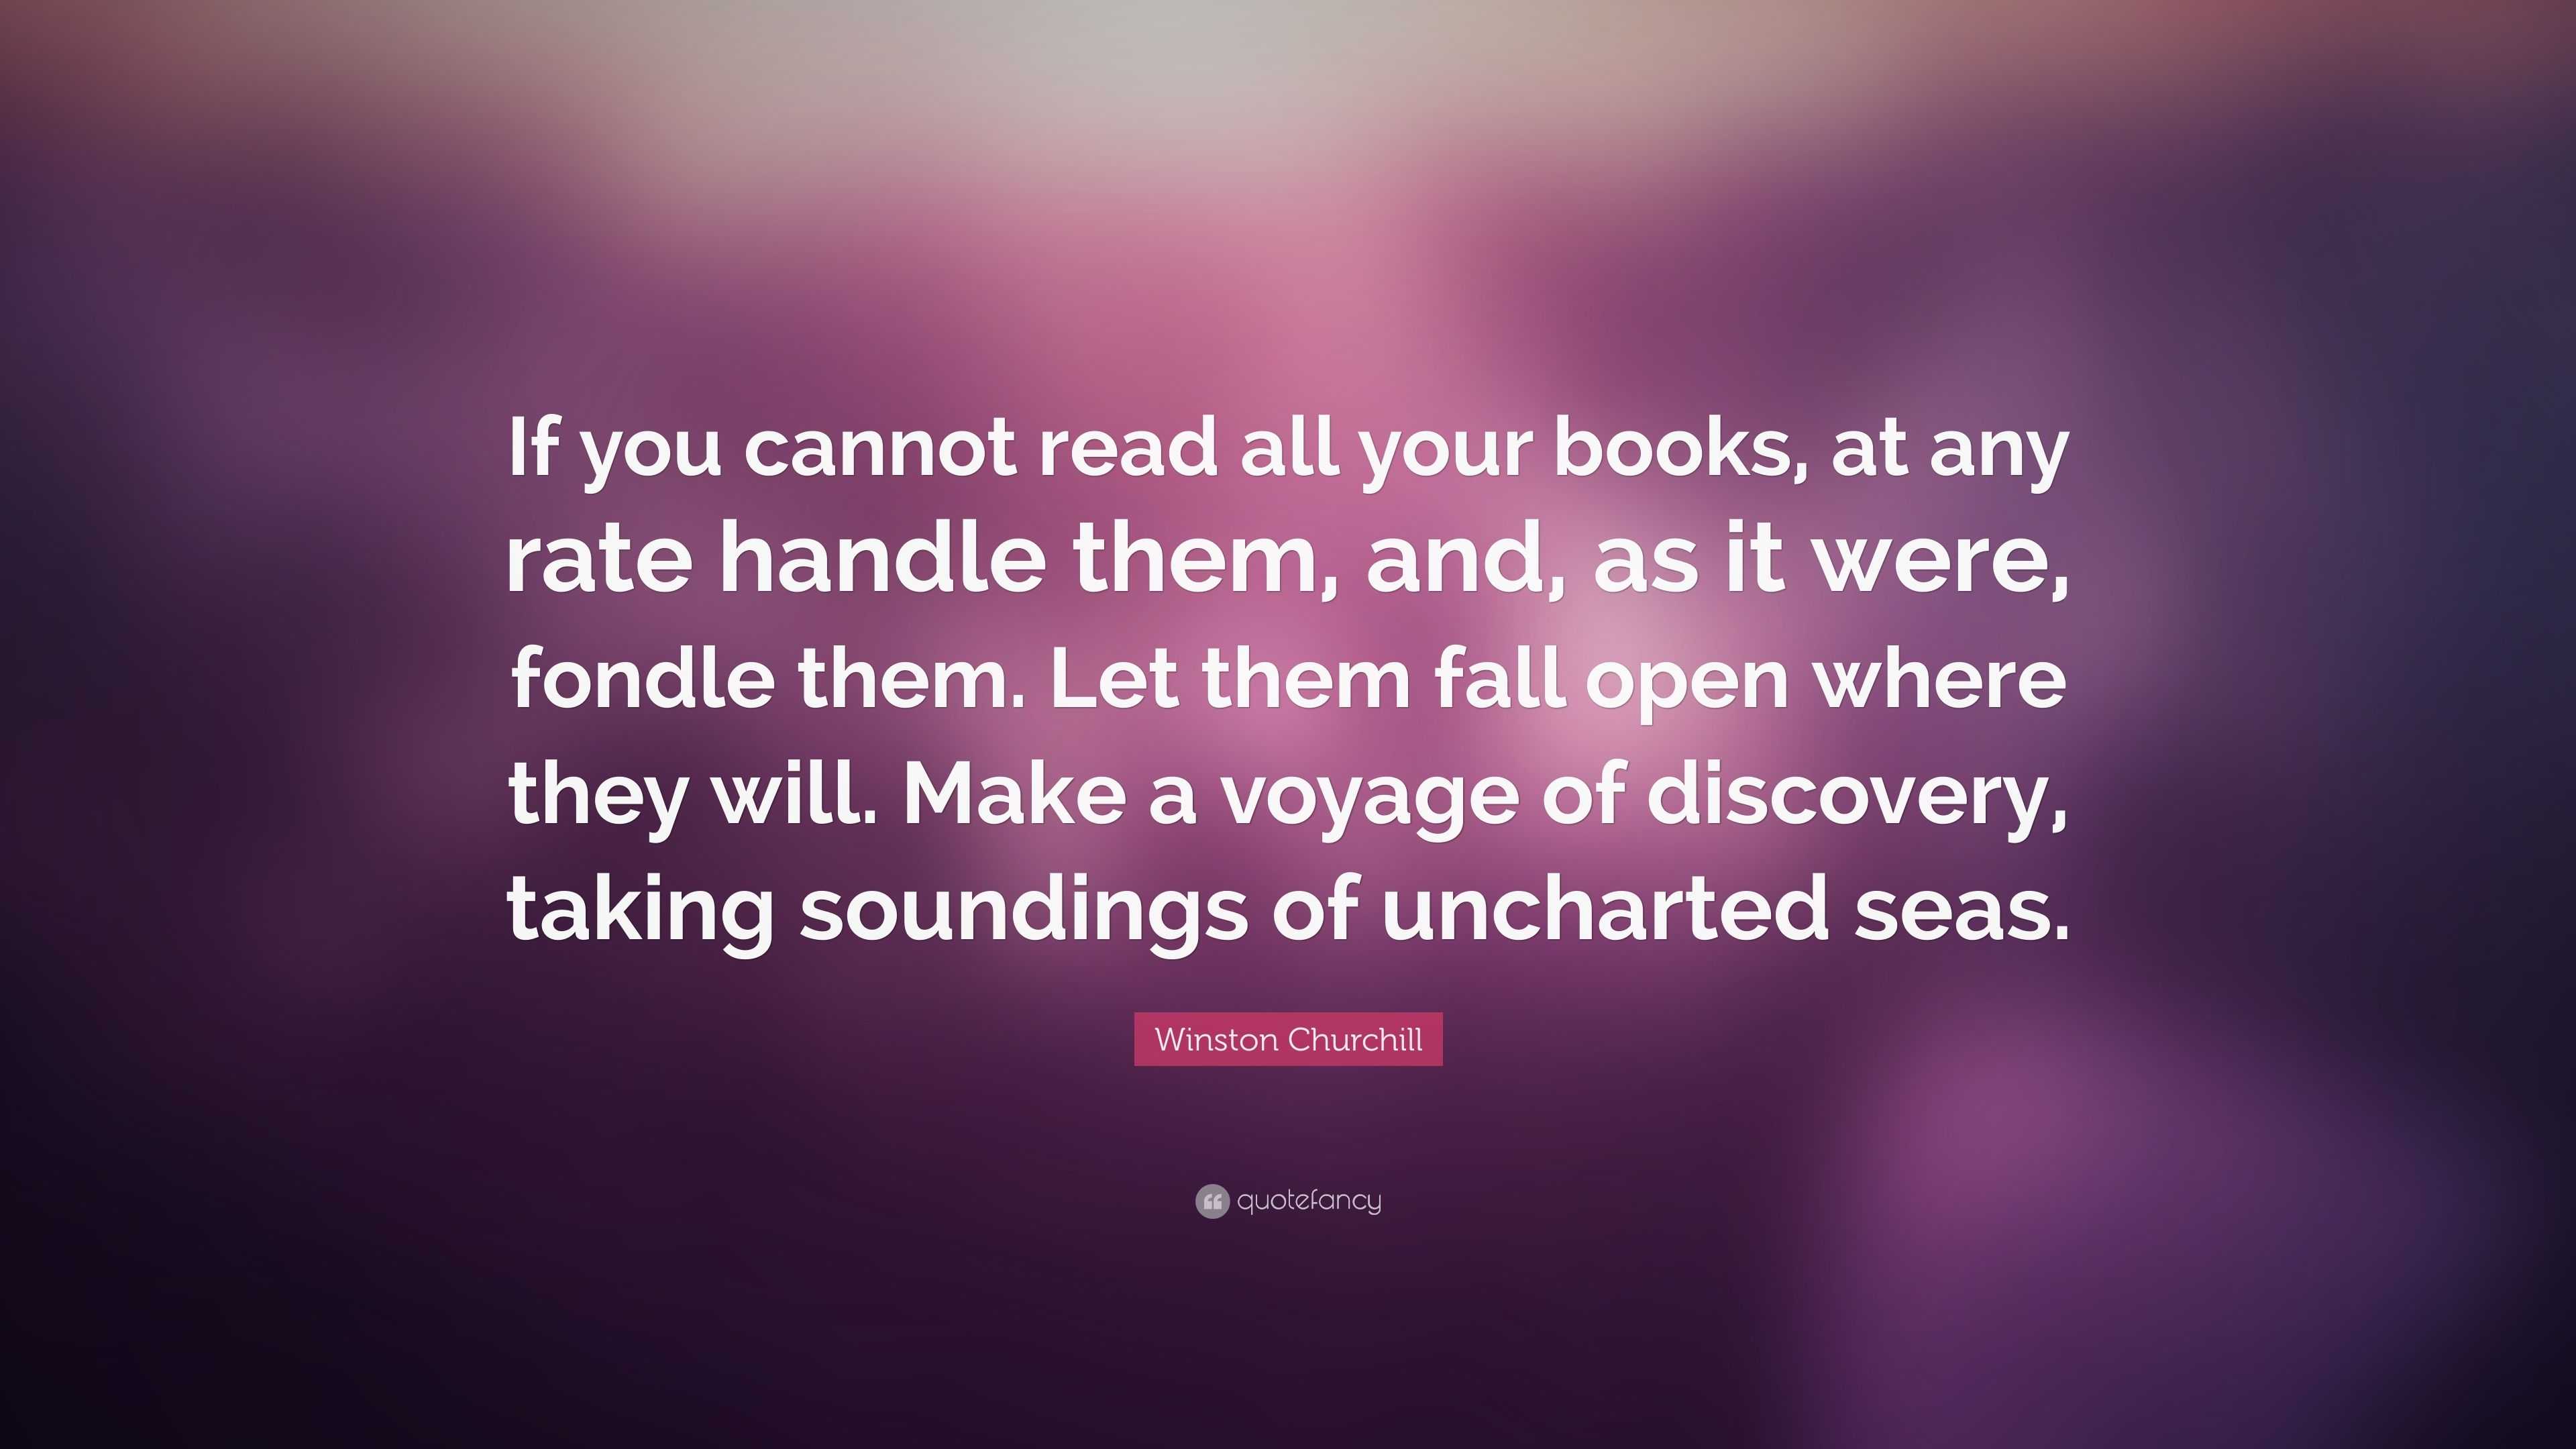 Winston Churchill Quote: “If you cannot read all your books, at any ...